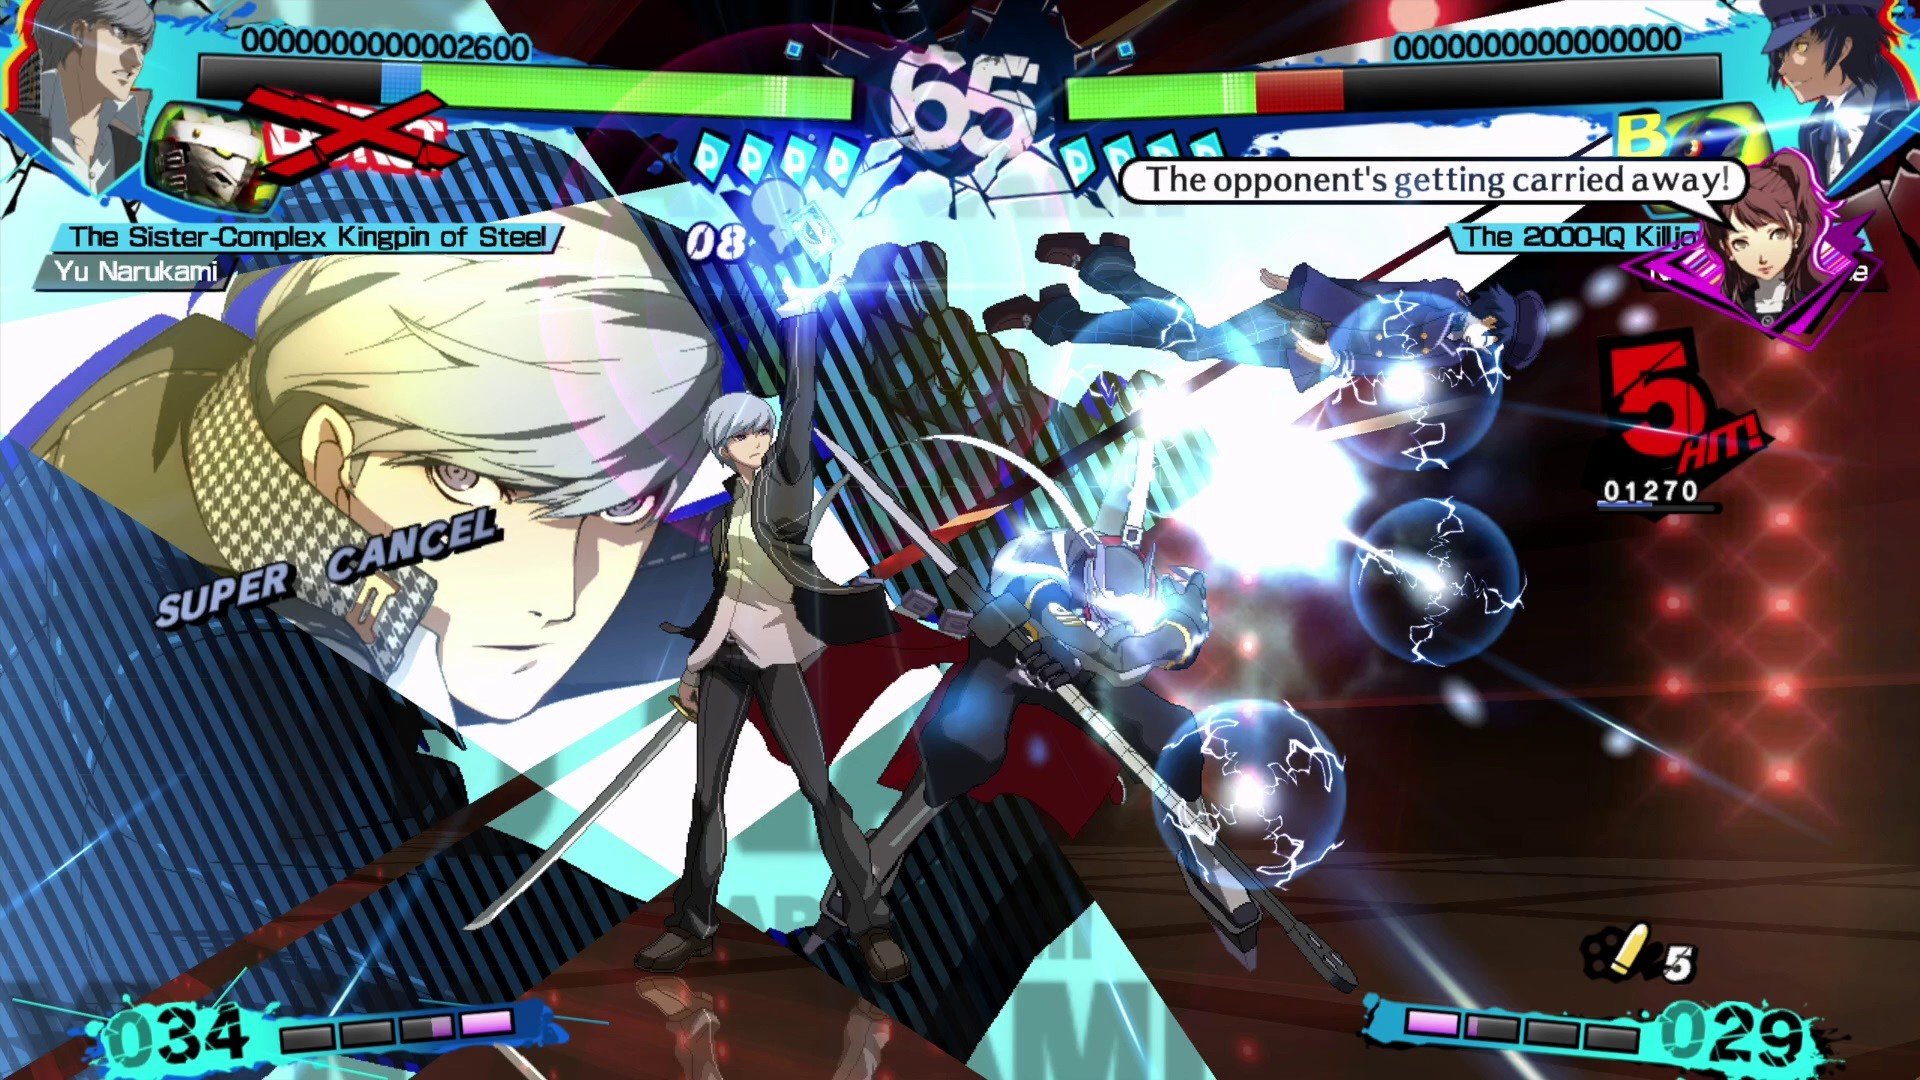 Persona 4 Arena Ultimax for PS4, PC - rollback netcode update now available - Gematsu